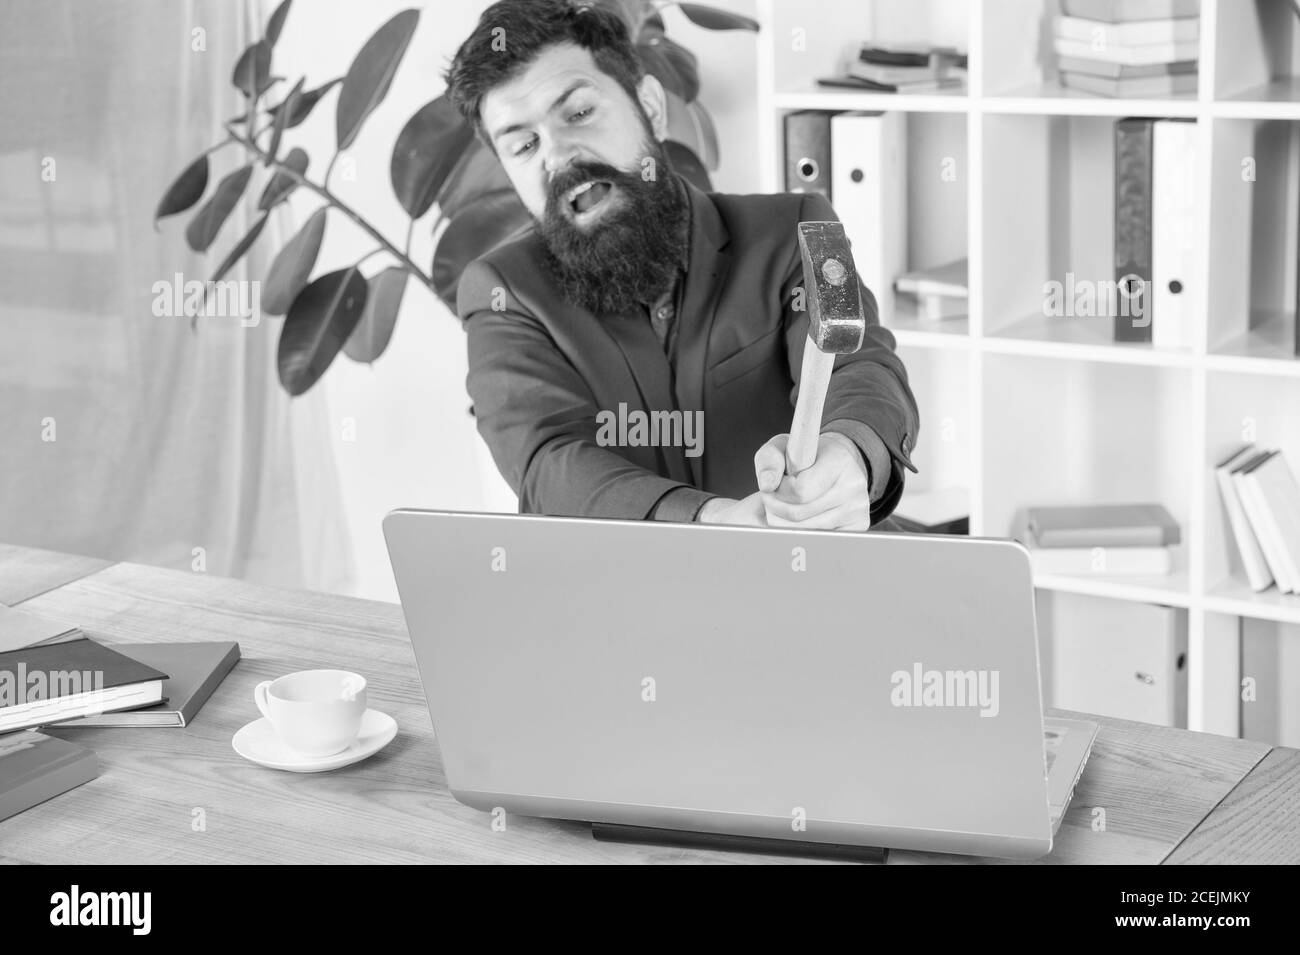 Lagging system. Hate office routine. Man bearded crush computer. Software license agreement. Destroy laptop. Hateful job. Bad computer. Slow internet connection. Outdated software. Computer lag. Stock Photo